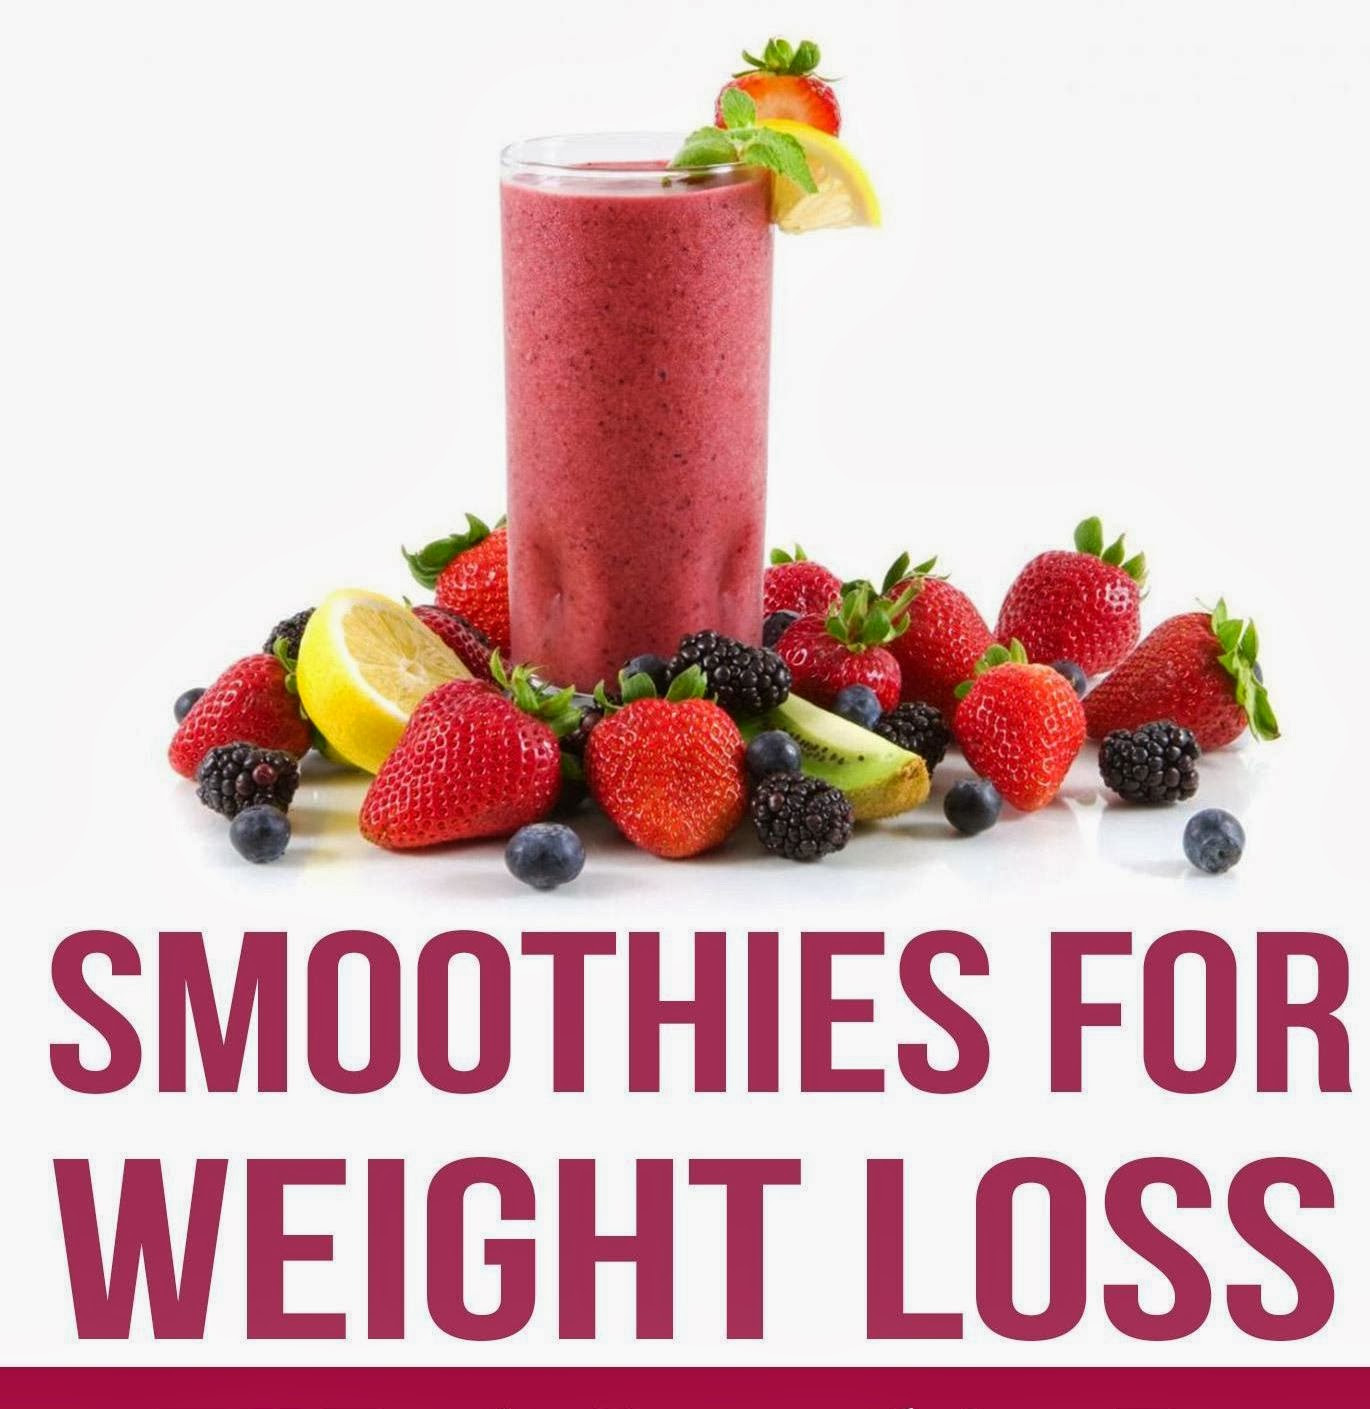 Quick Weight Loss Smoothies
 Smoothies for Quick Weight Loss